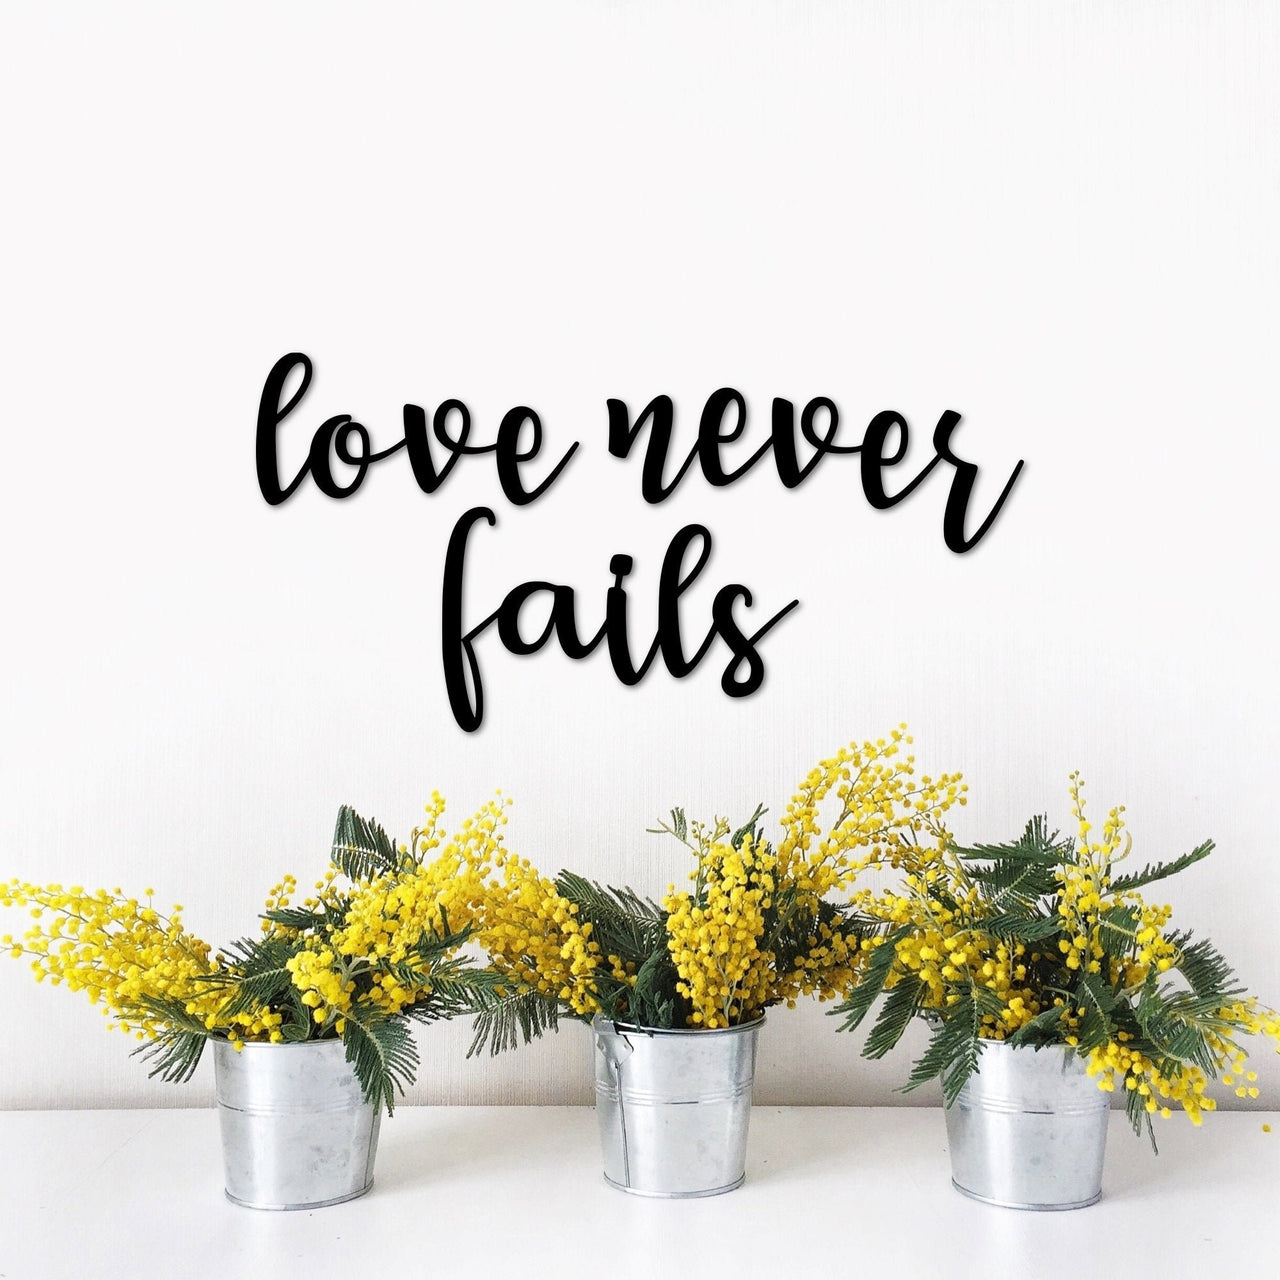 Love Never Fails Metal Wall Words | Love Quote for the Wall | Inspirational Sayings | Love Decor for Master Bedroom | Religious Scripture